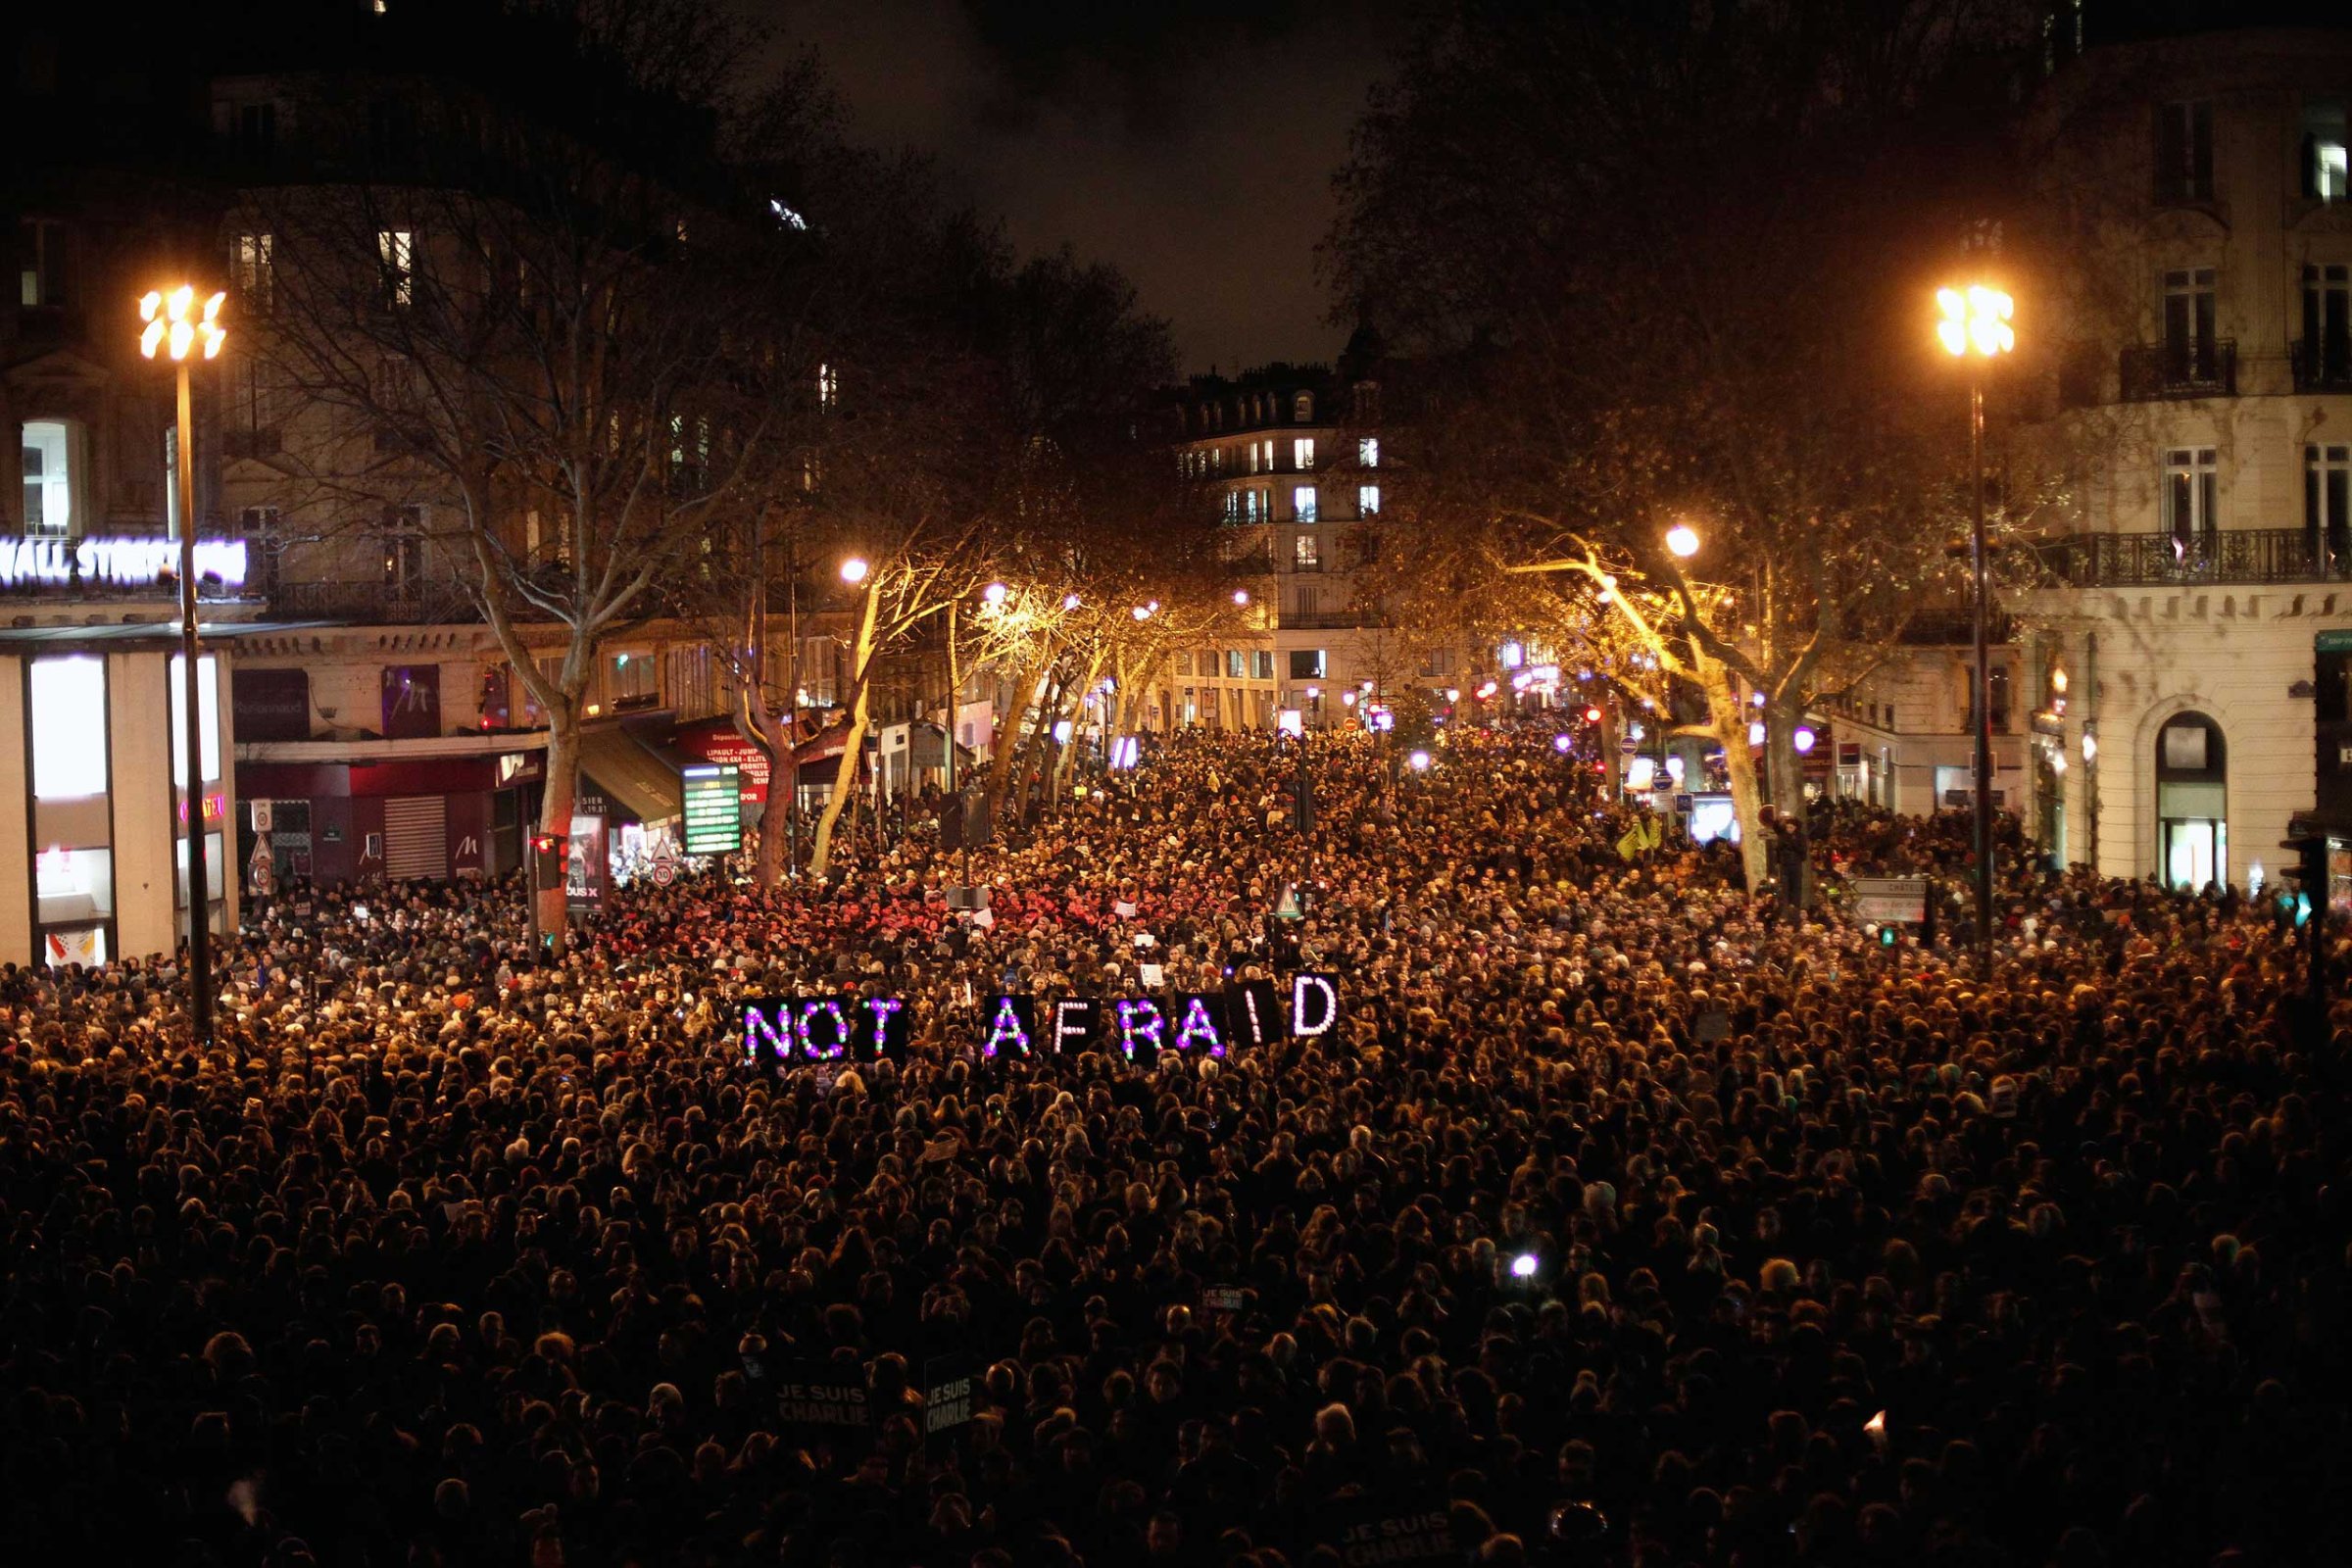 People gather to pay respect for the victims of a terror attack against a satirical newspaper, in Paris, Jan. 7, 2015.